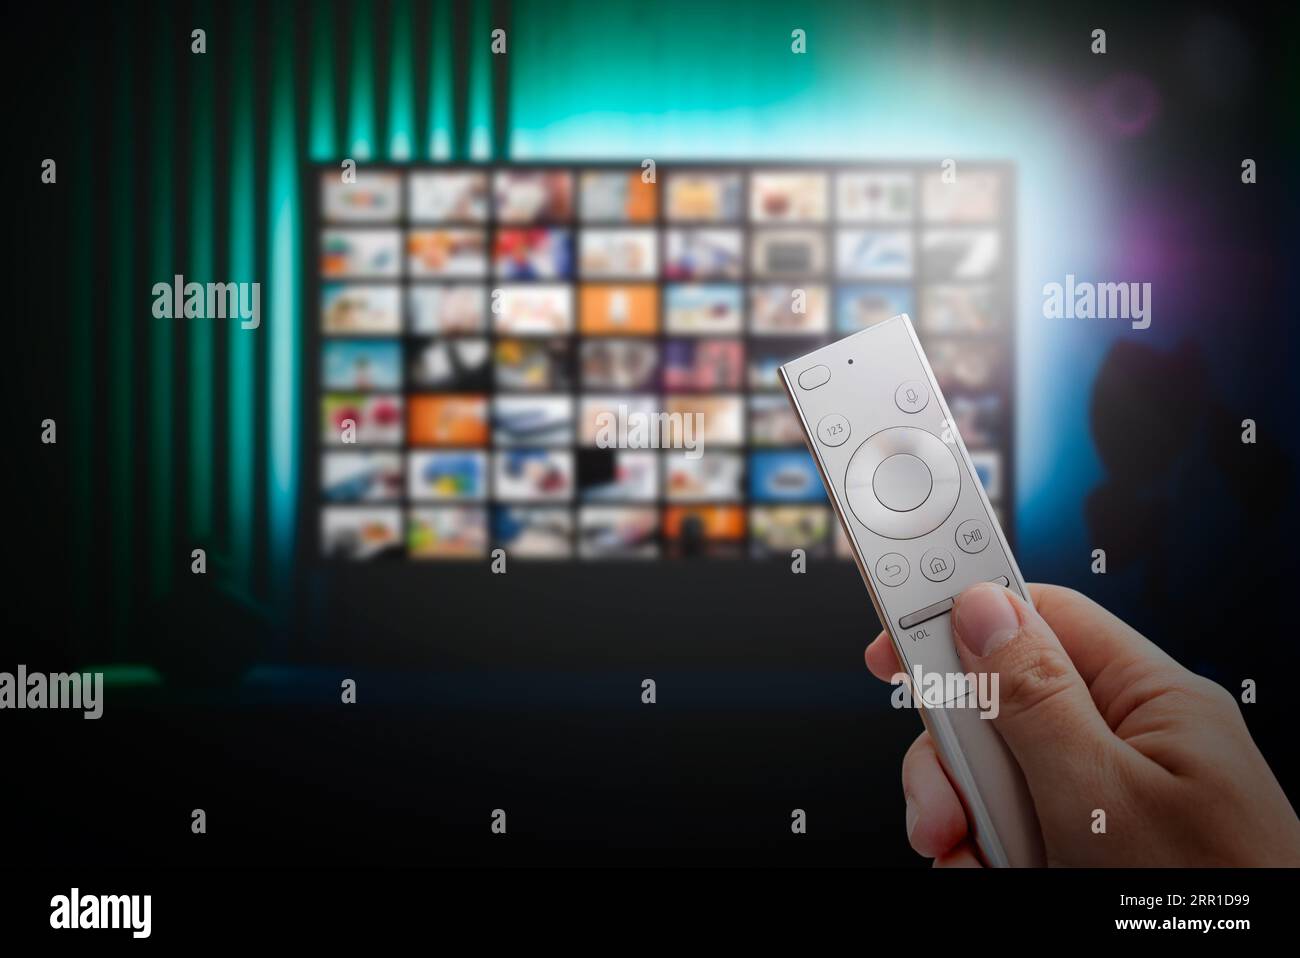 VOD service screen. Man watching TV with remote control in hand. Stock Photo